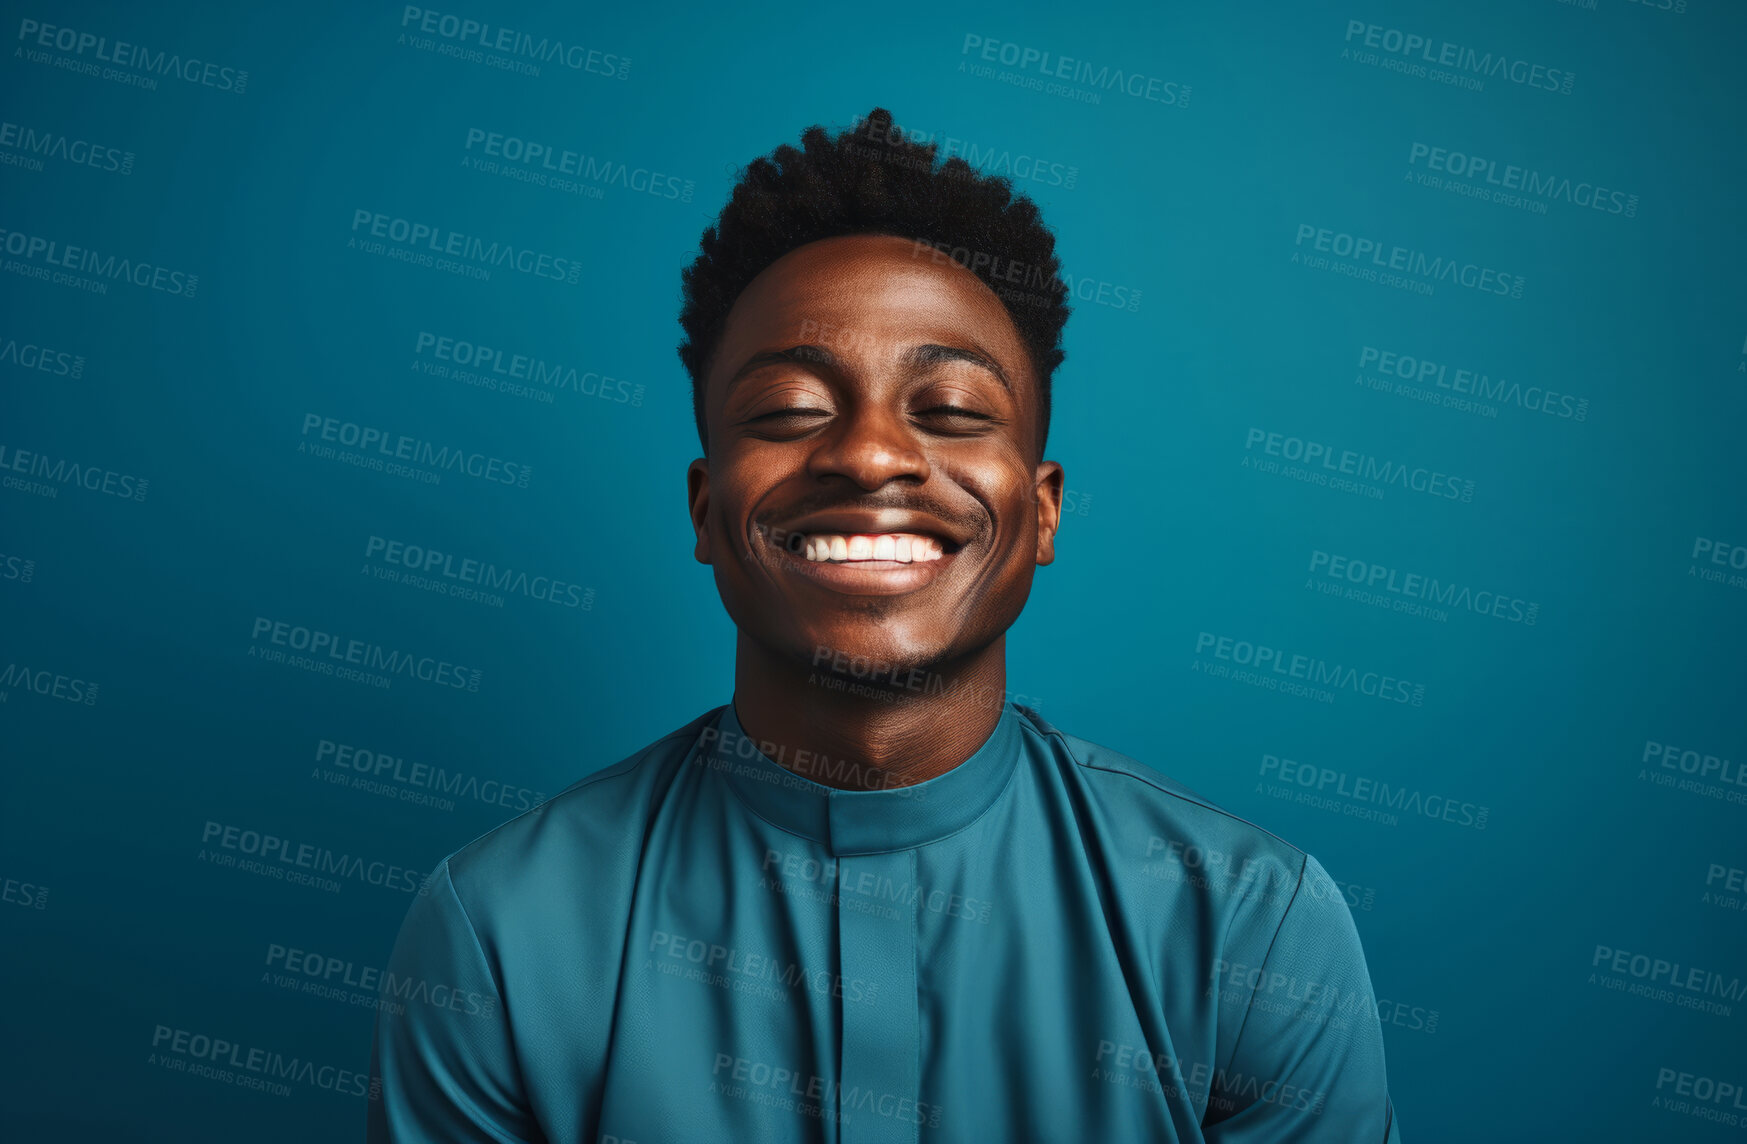 Buy stock photo Portrait of African American priest smiling eyes closed. Against backdrop. Religion concept.